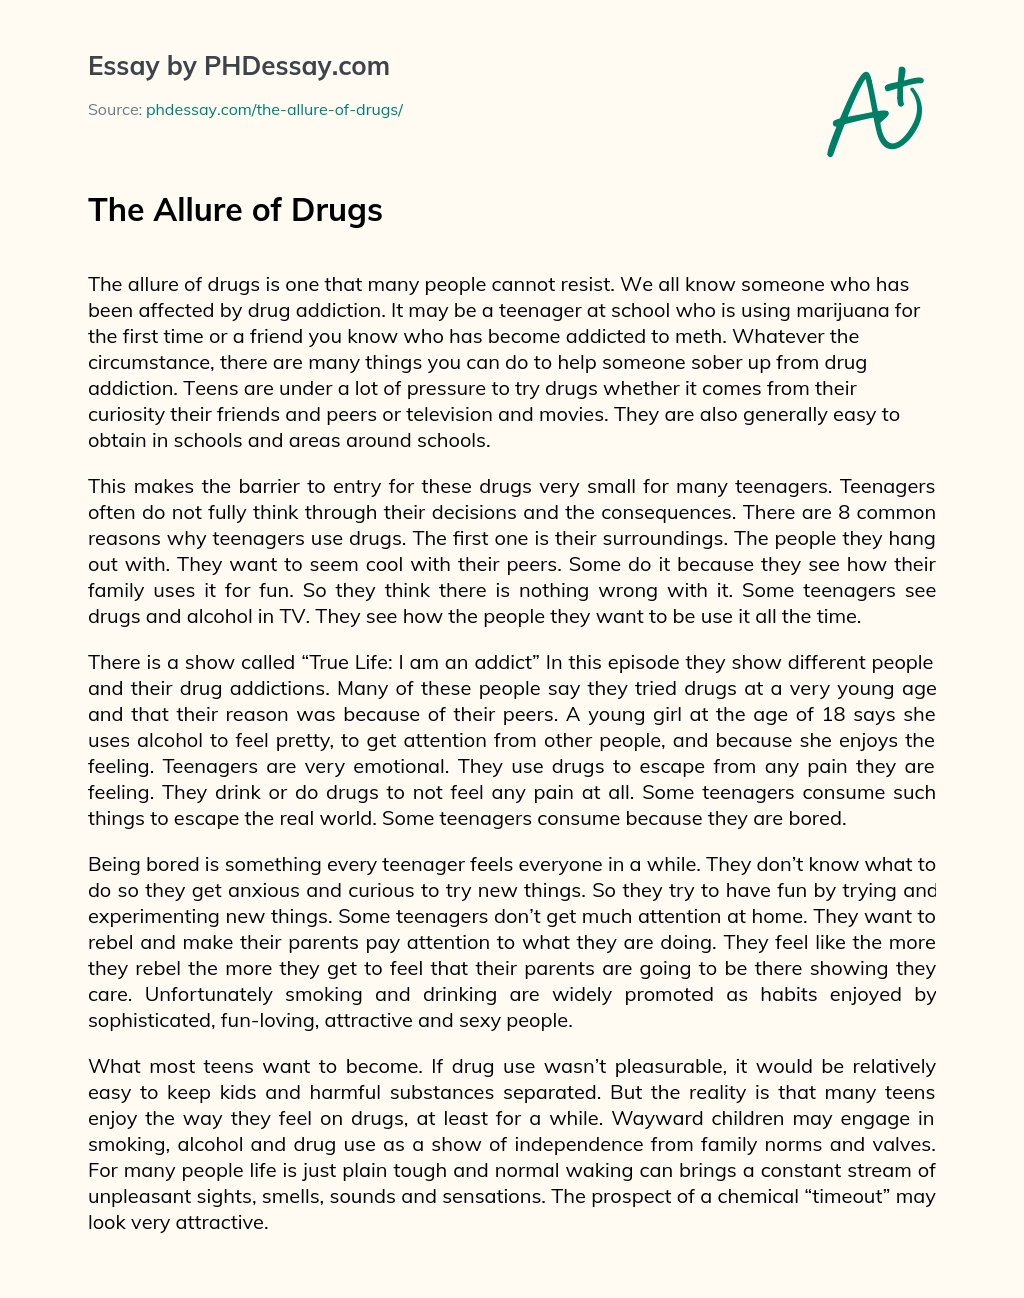 The Allure of Drugs essay